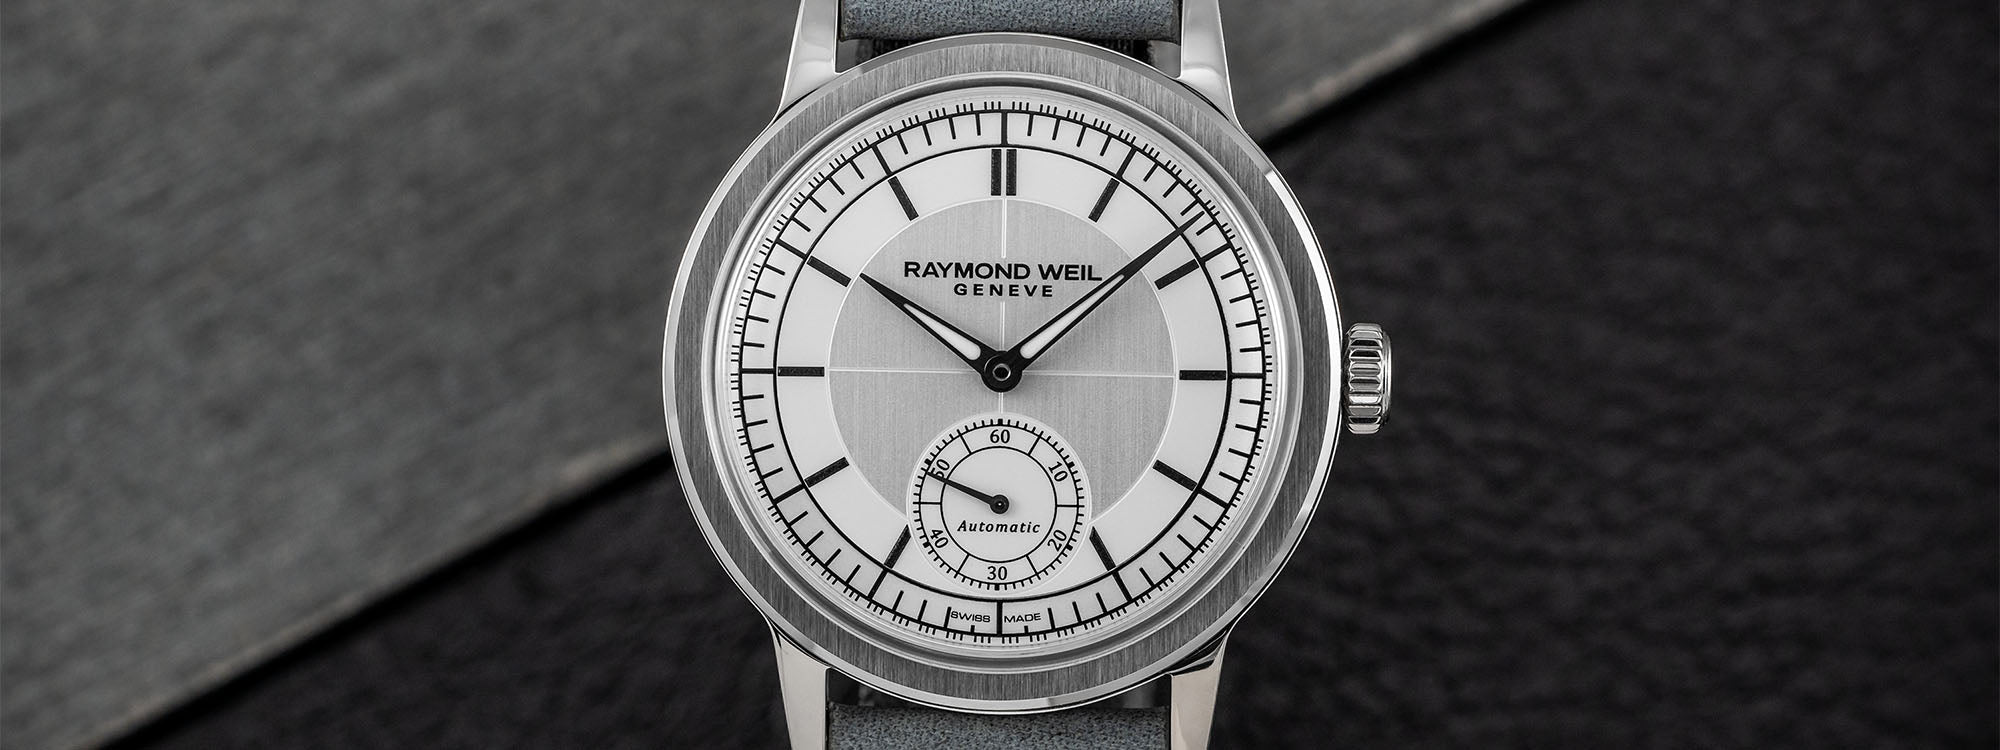 Raymond Weil Millesime Small Seconds: Hands-On Review of the GPHG Award-Winner